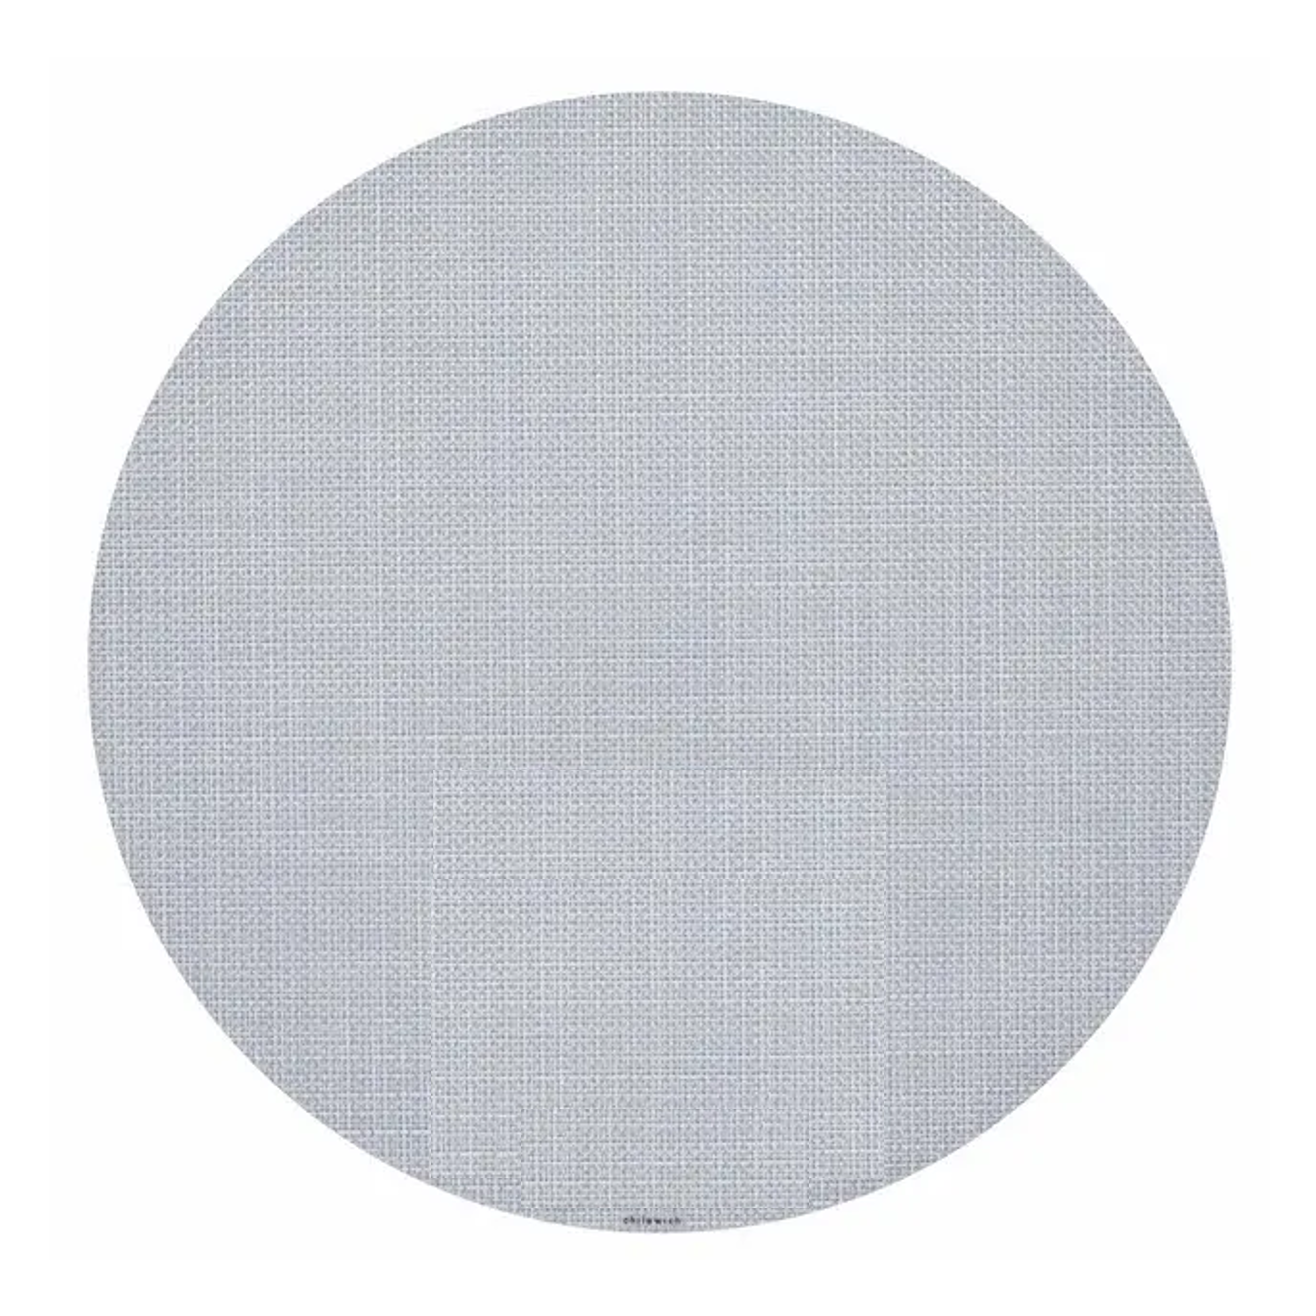 Chilewich Round Mini Basketweave Placemat - Sky